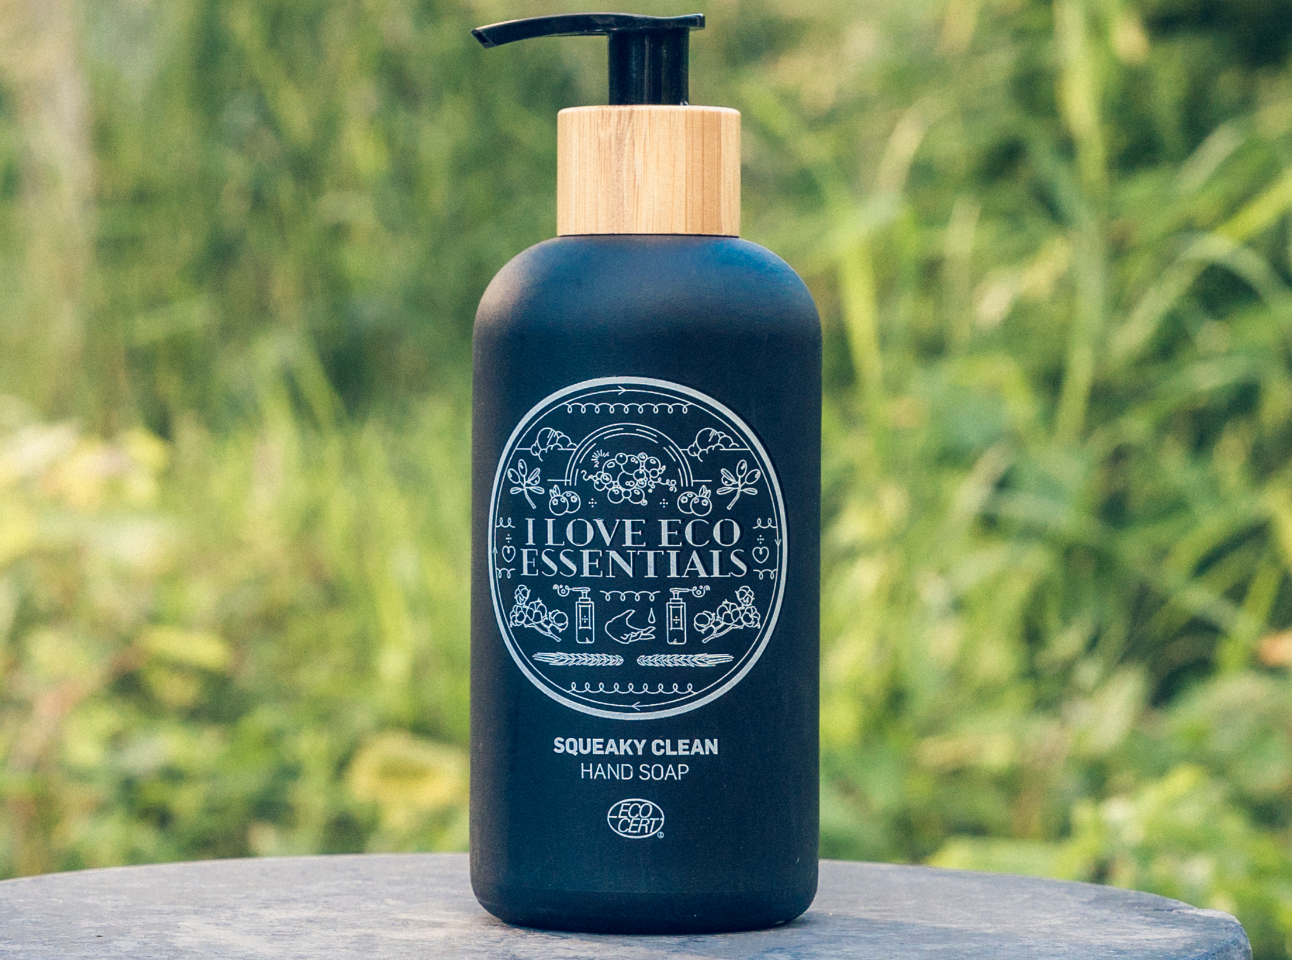 Soulmade "Squeaky Clean" Hand Soap - Ecocert Natural